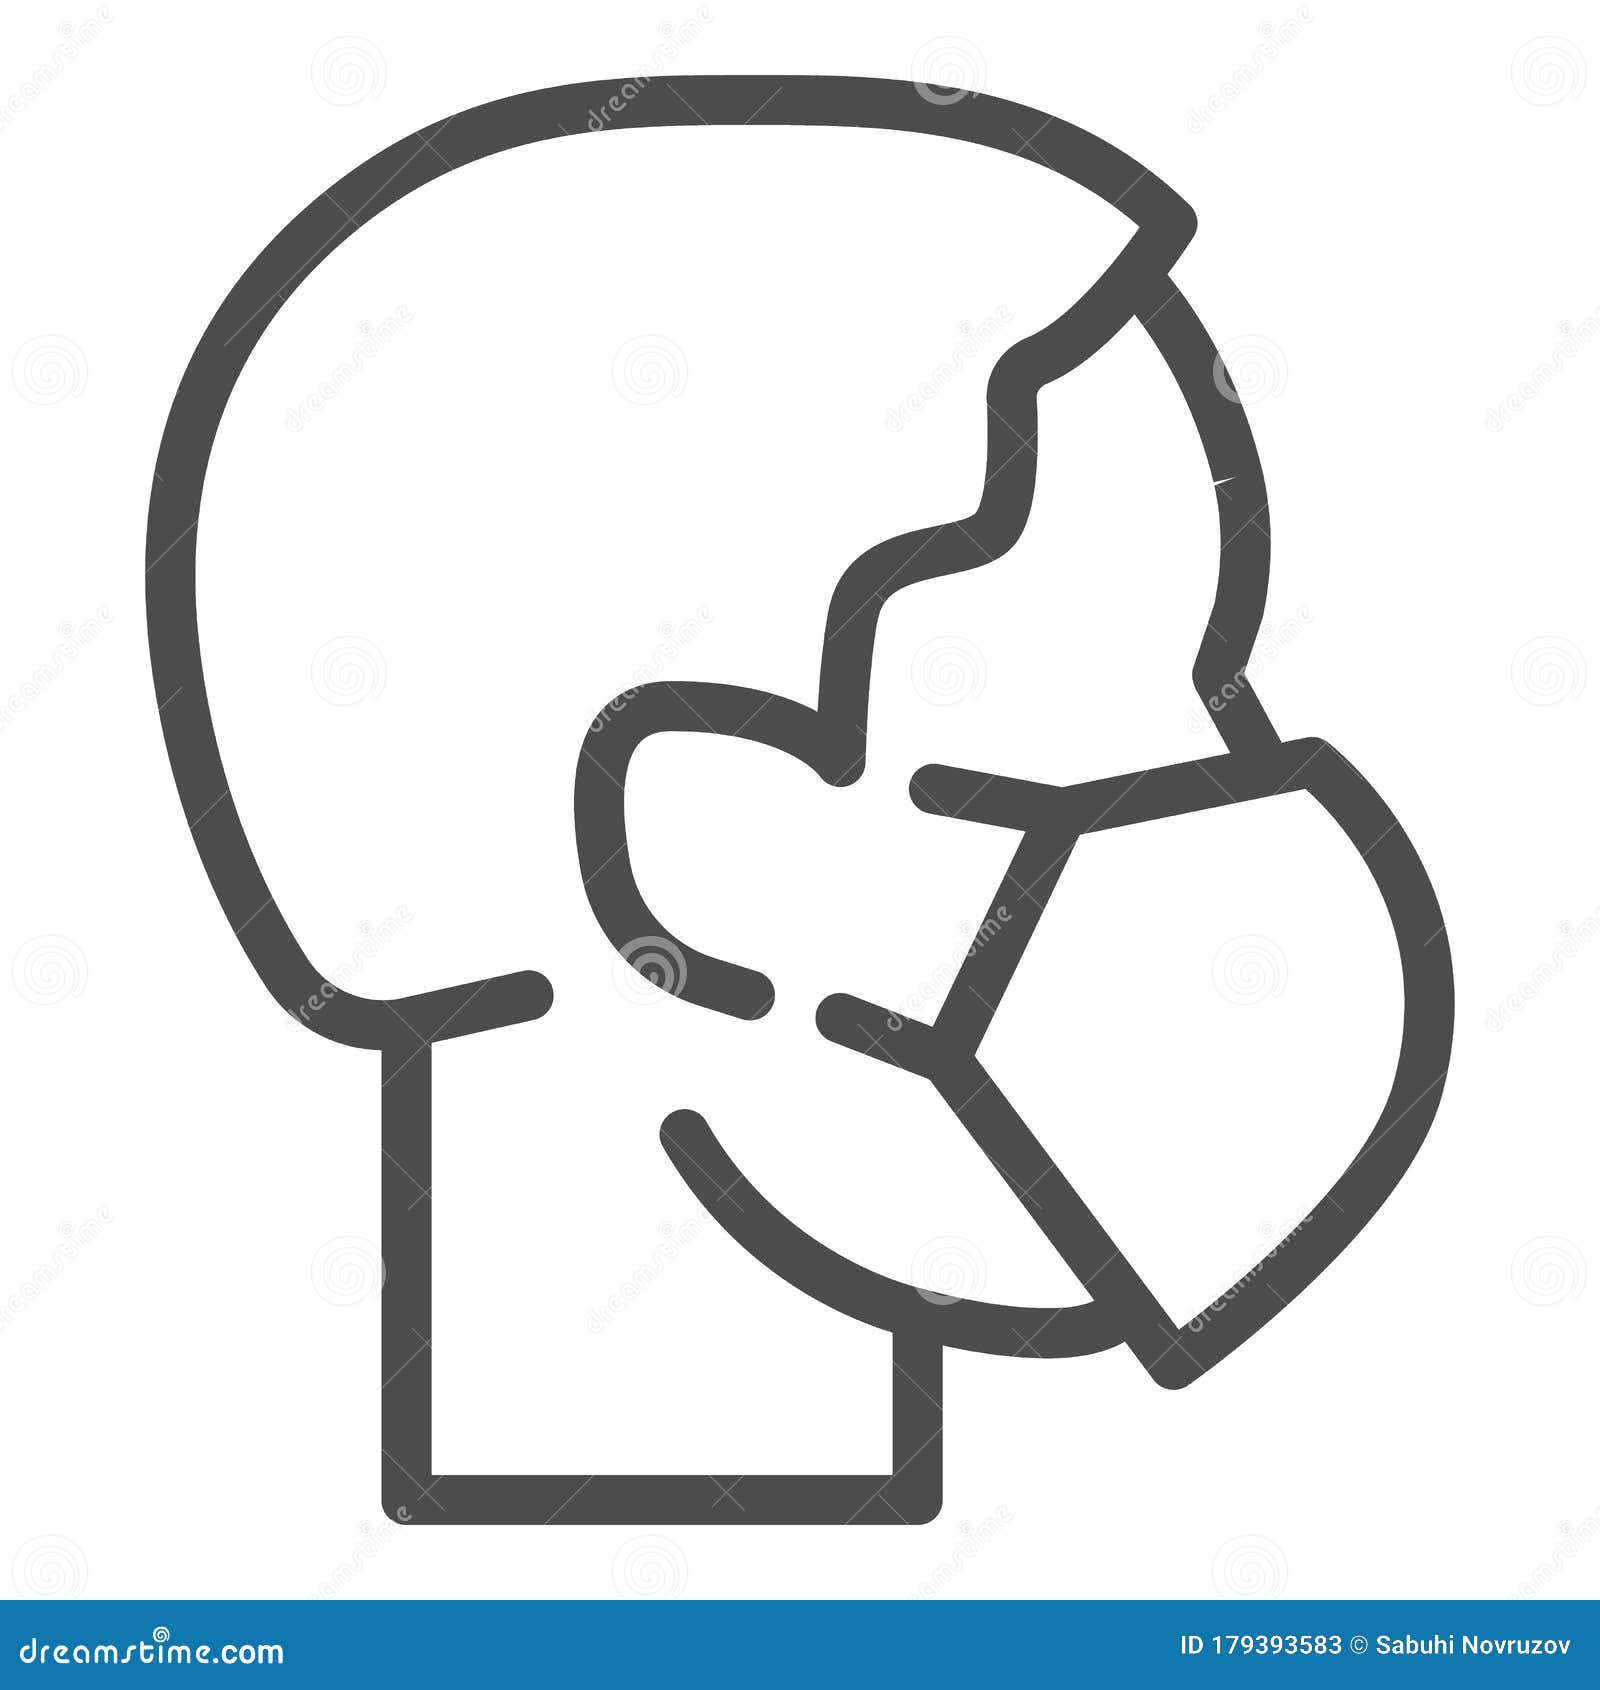 person head with respirator or mask line icon. masked person outline style pictogram on white background. coronavirus